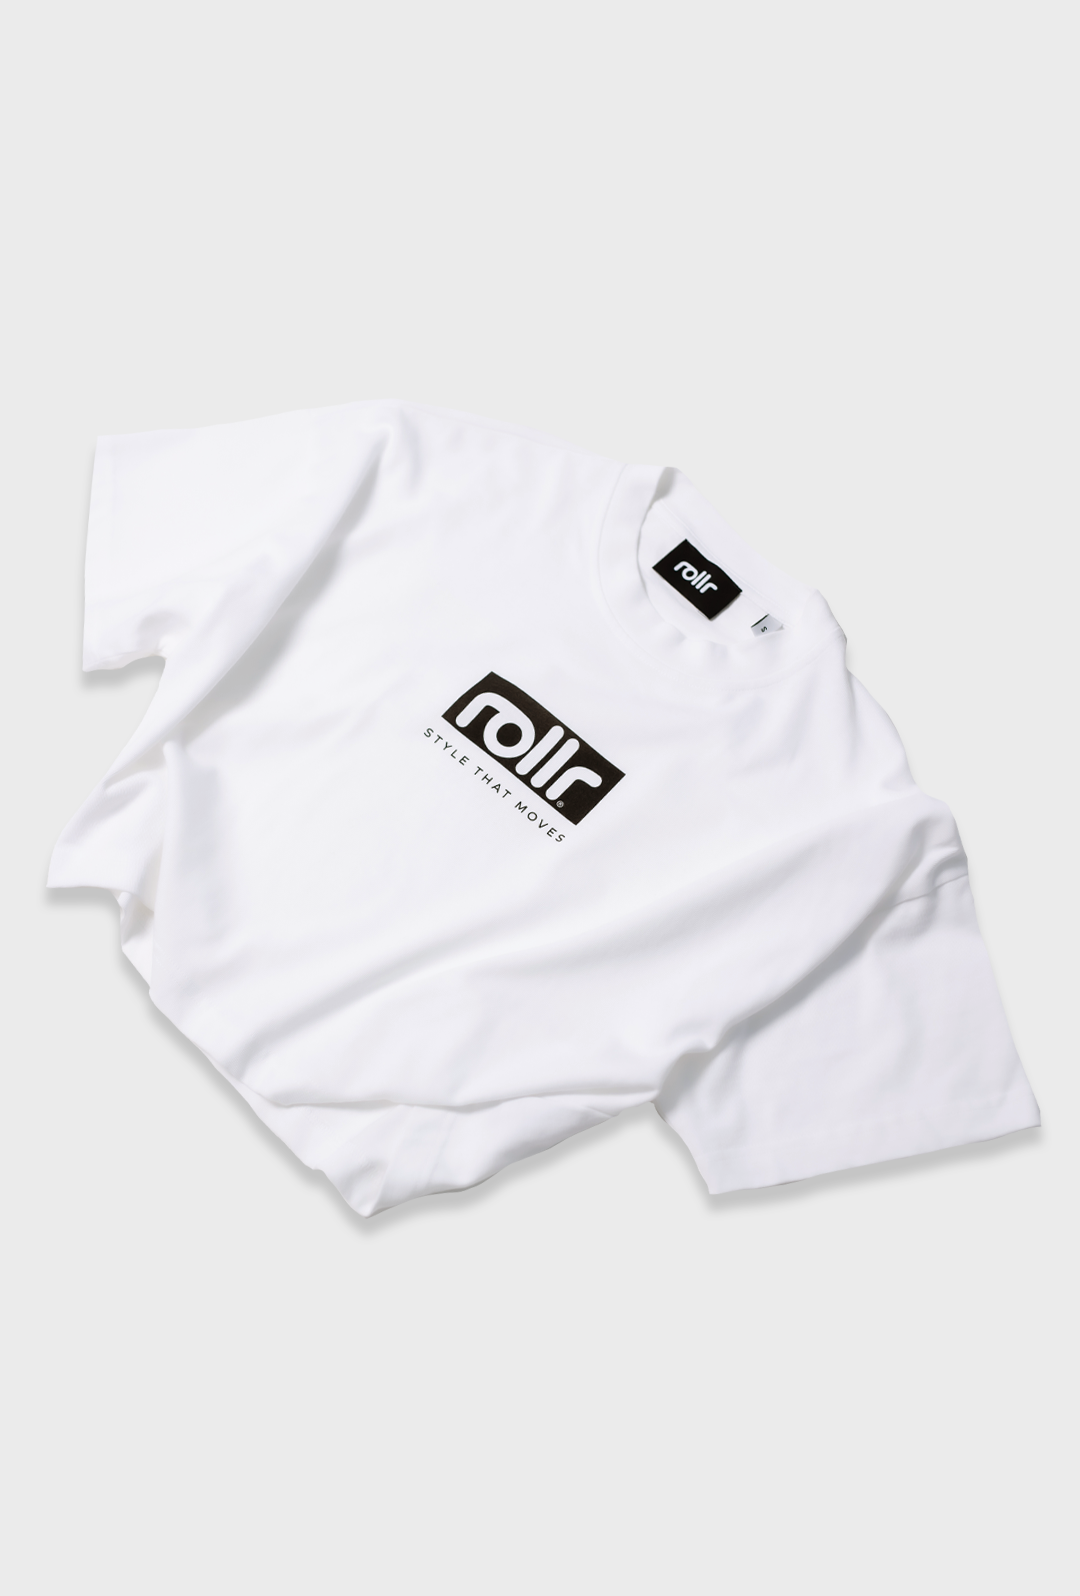 rollr clothing polar white womens cropped tee for women by roller clothing, with rollr logo and style that moves printed tagline